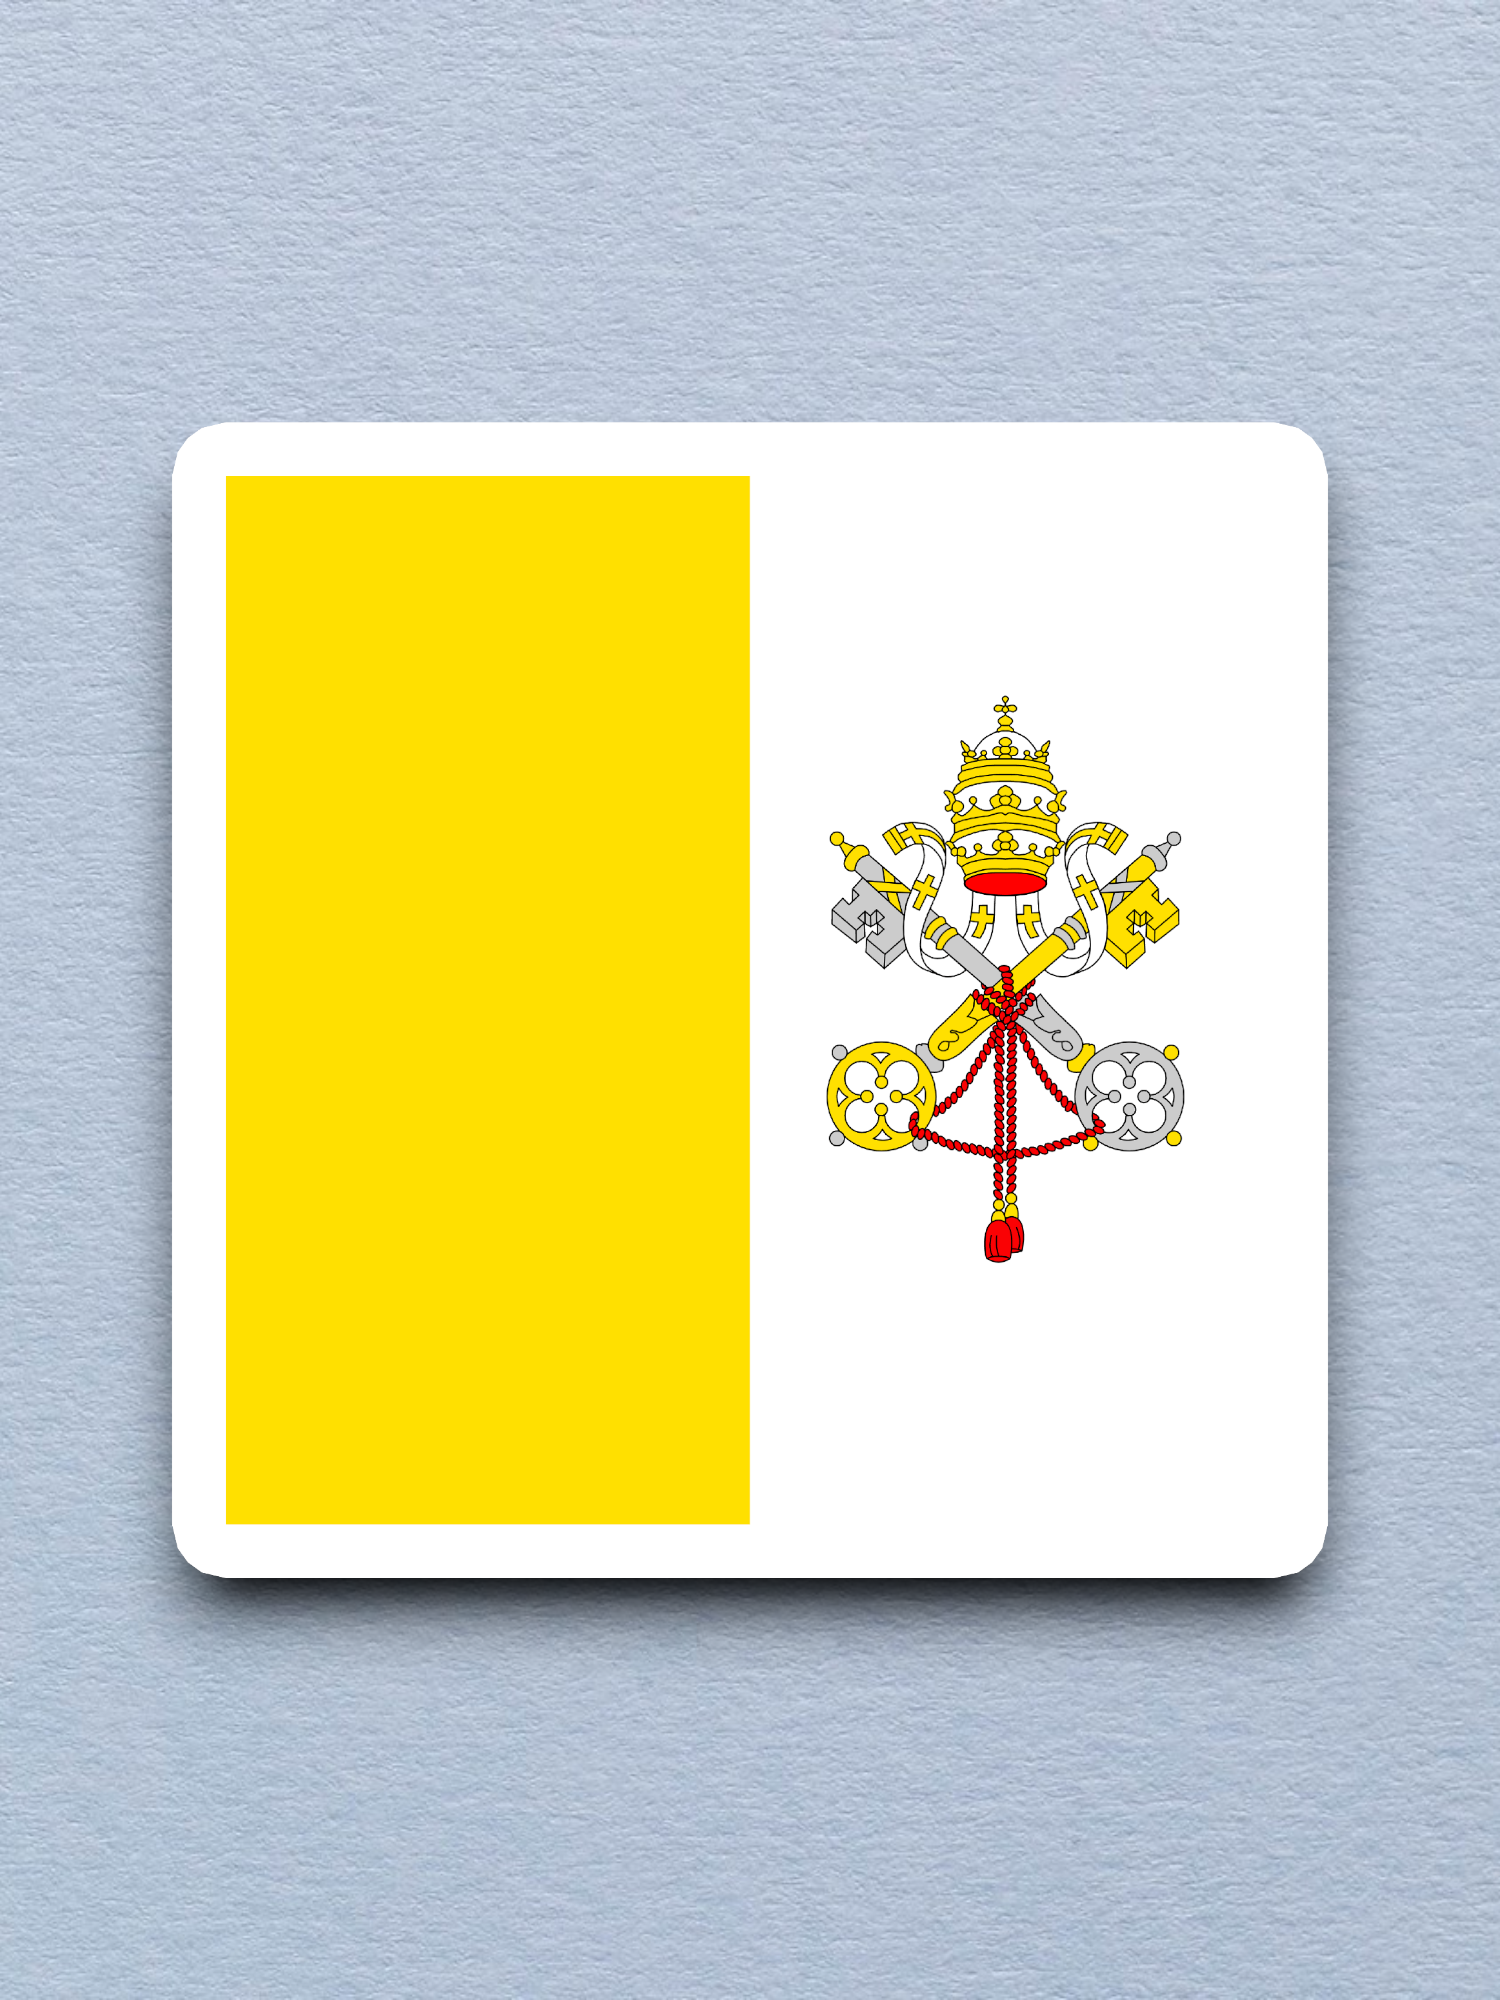 Vatican City (Holy See) Flag - International Country Flag Sticker